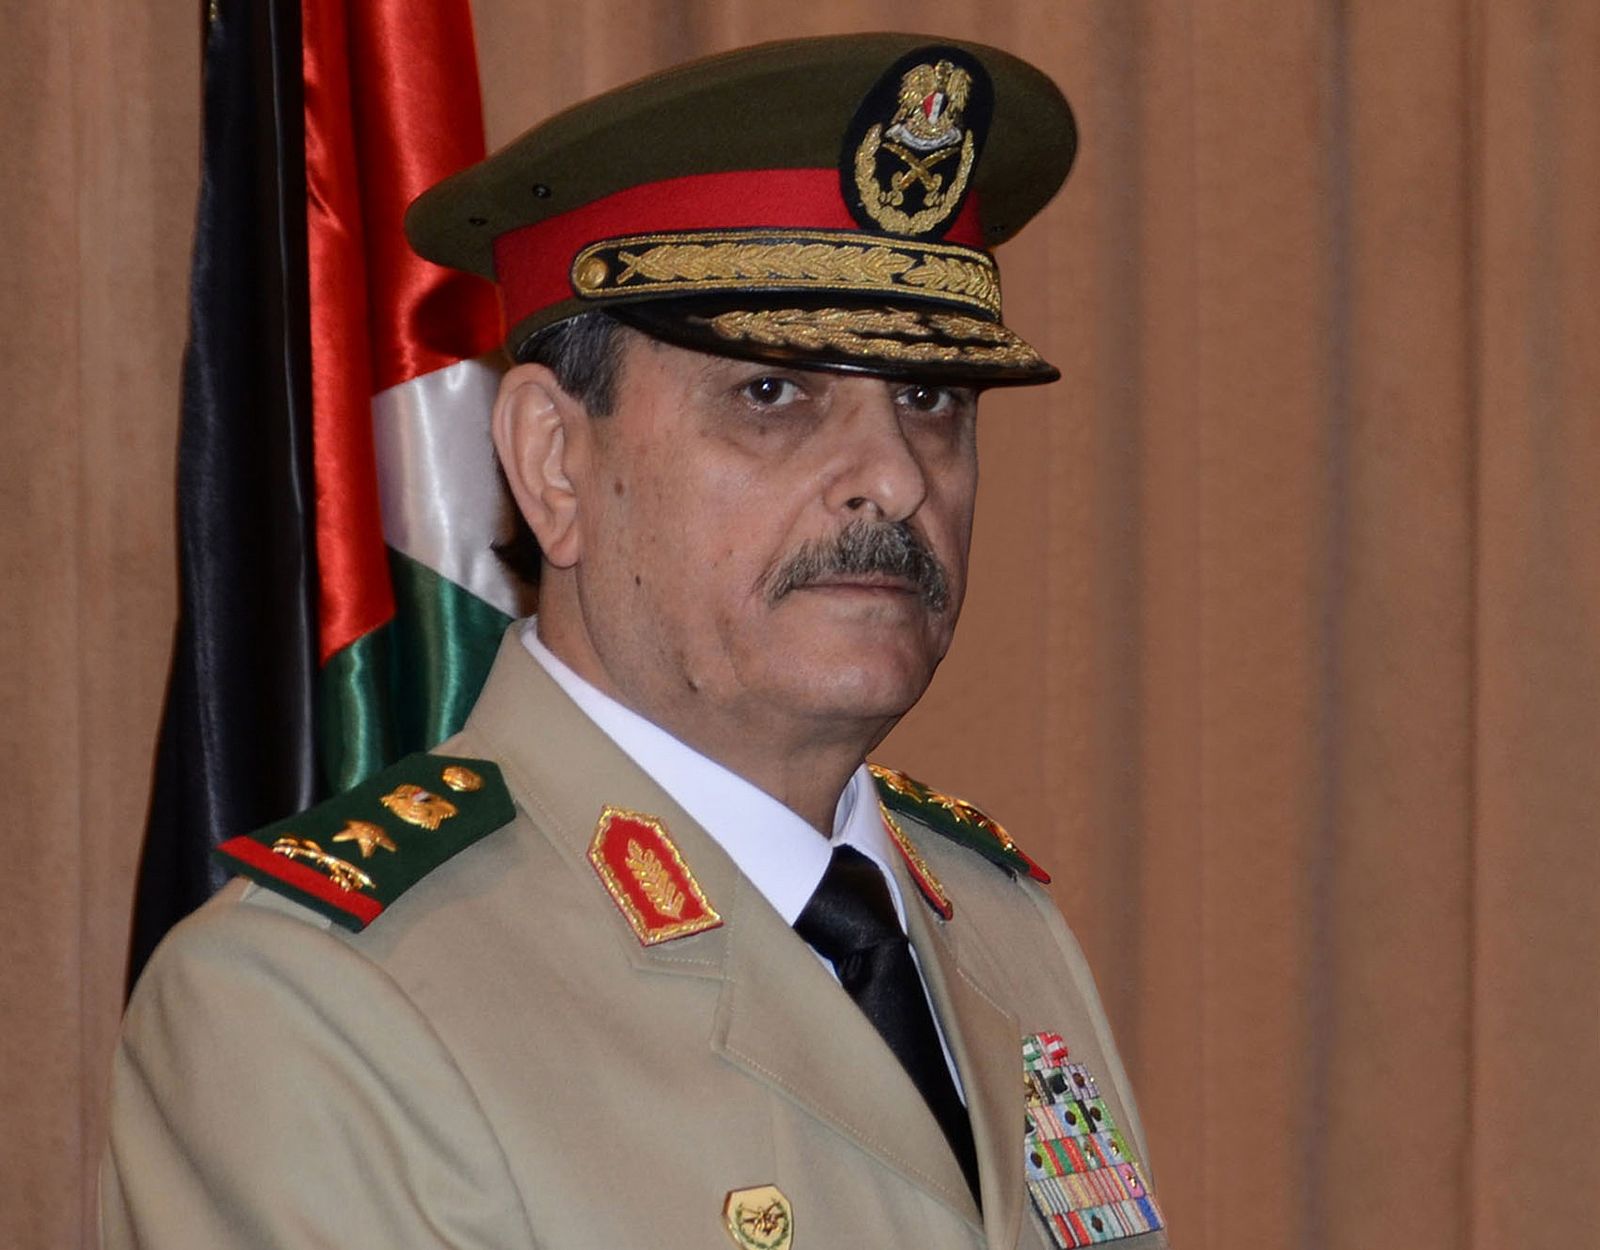 Newly appointed Syrian defence minister General Fahad Jassim al-Freij